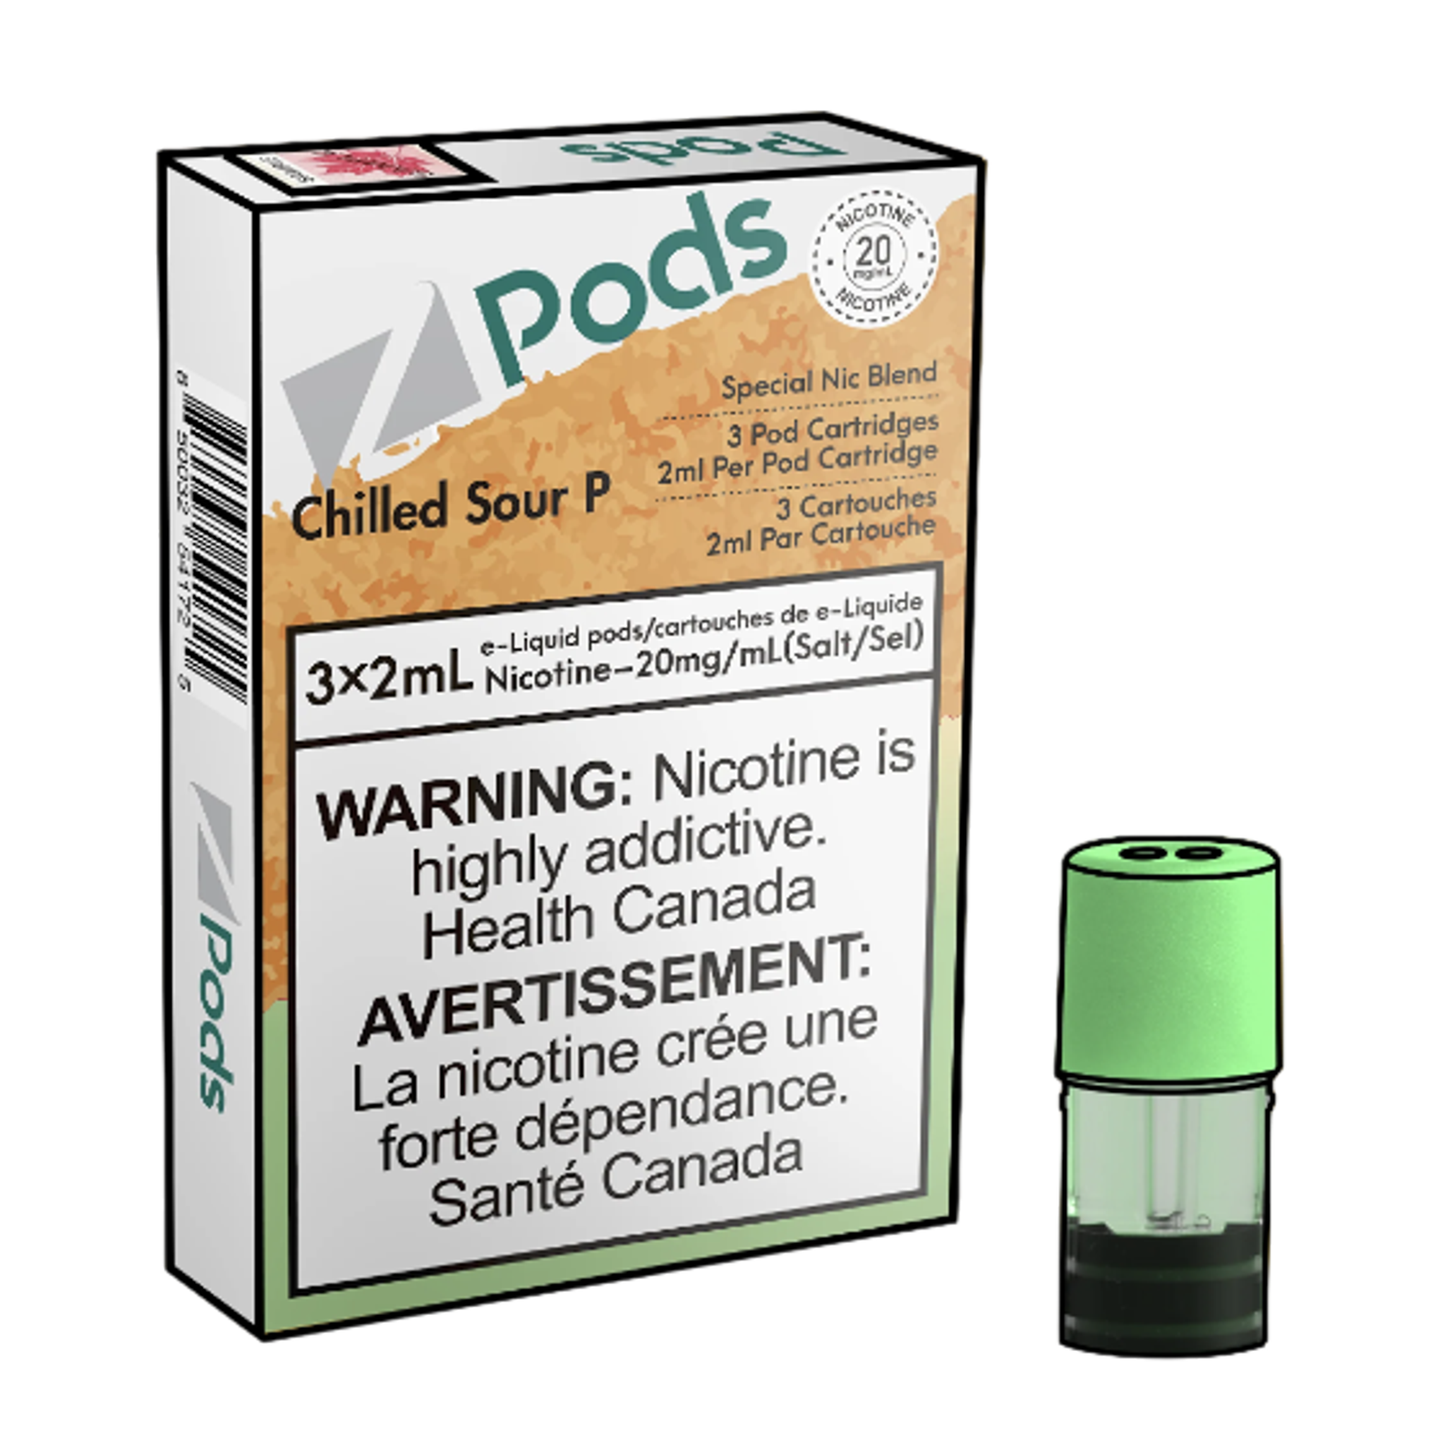 Zpods - Chilled Sour P